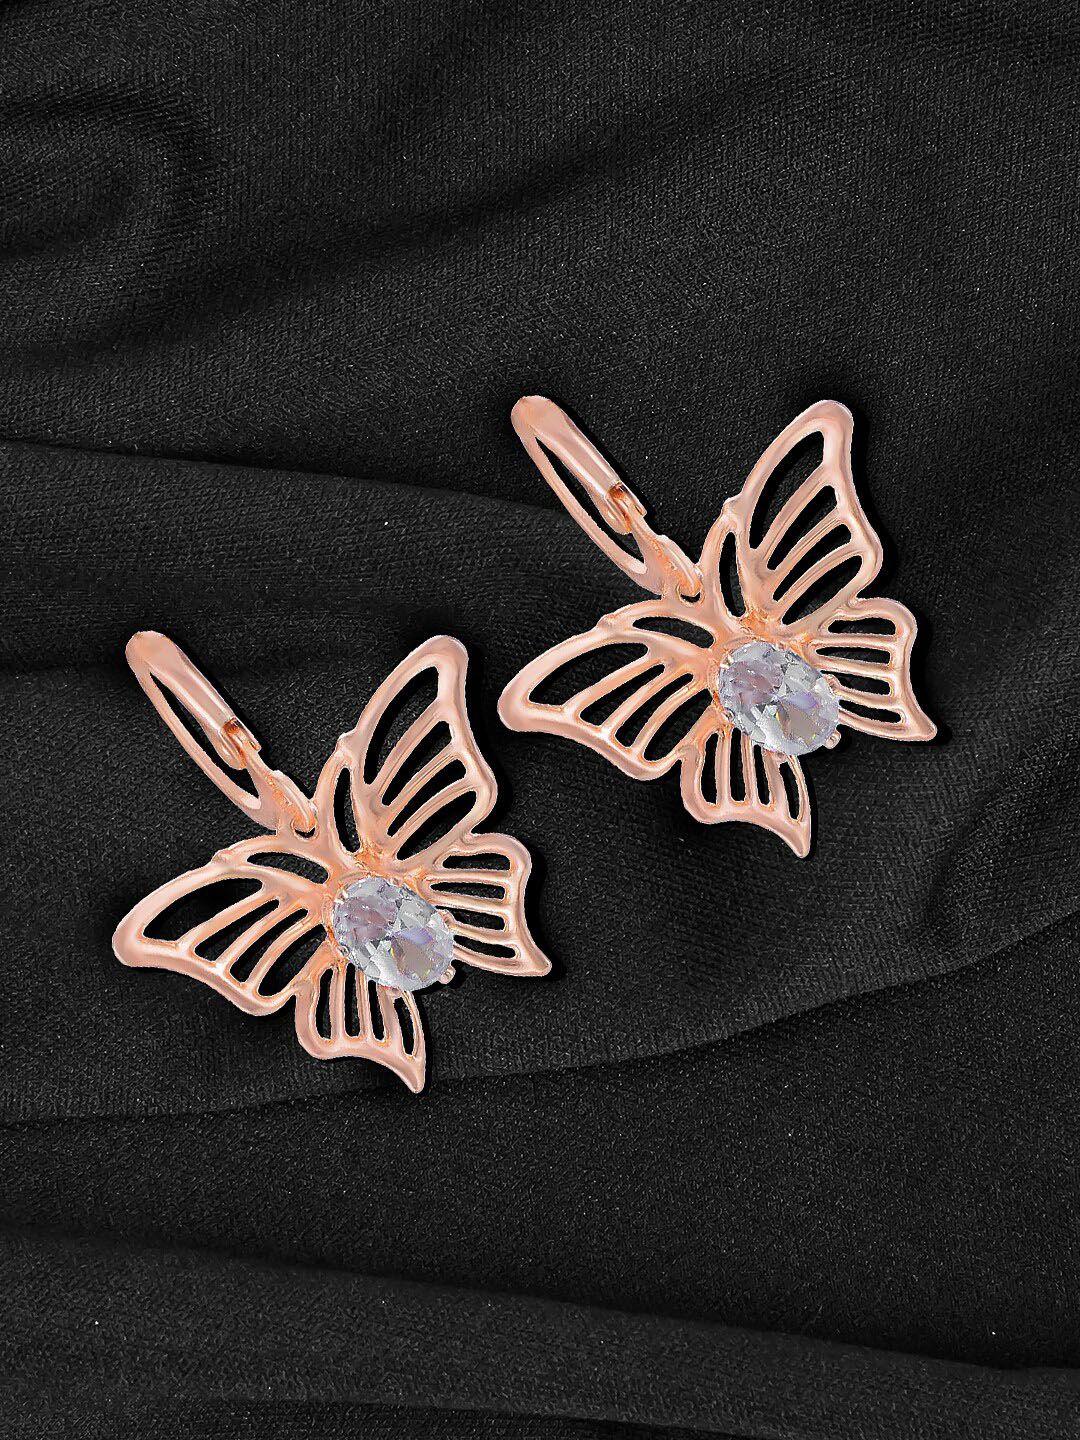 priviu rose gold plated quirky studs earrings